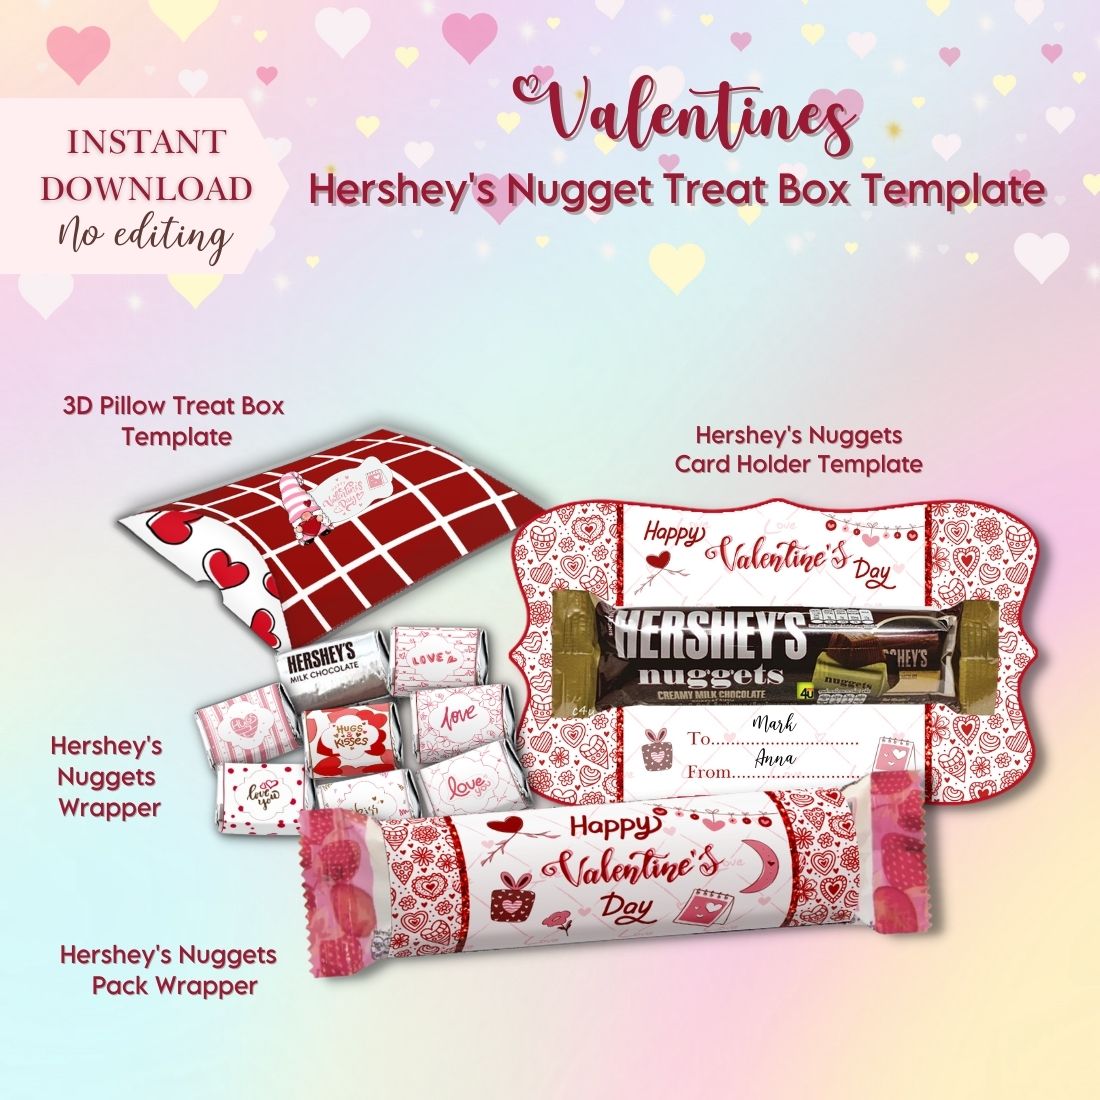 Valentines Hershey's Nugget Treat Box Printable Template cover image.